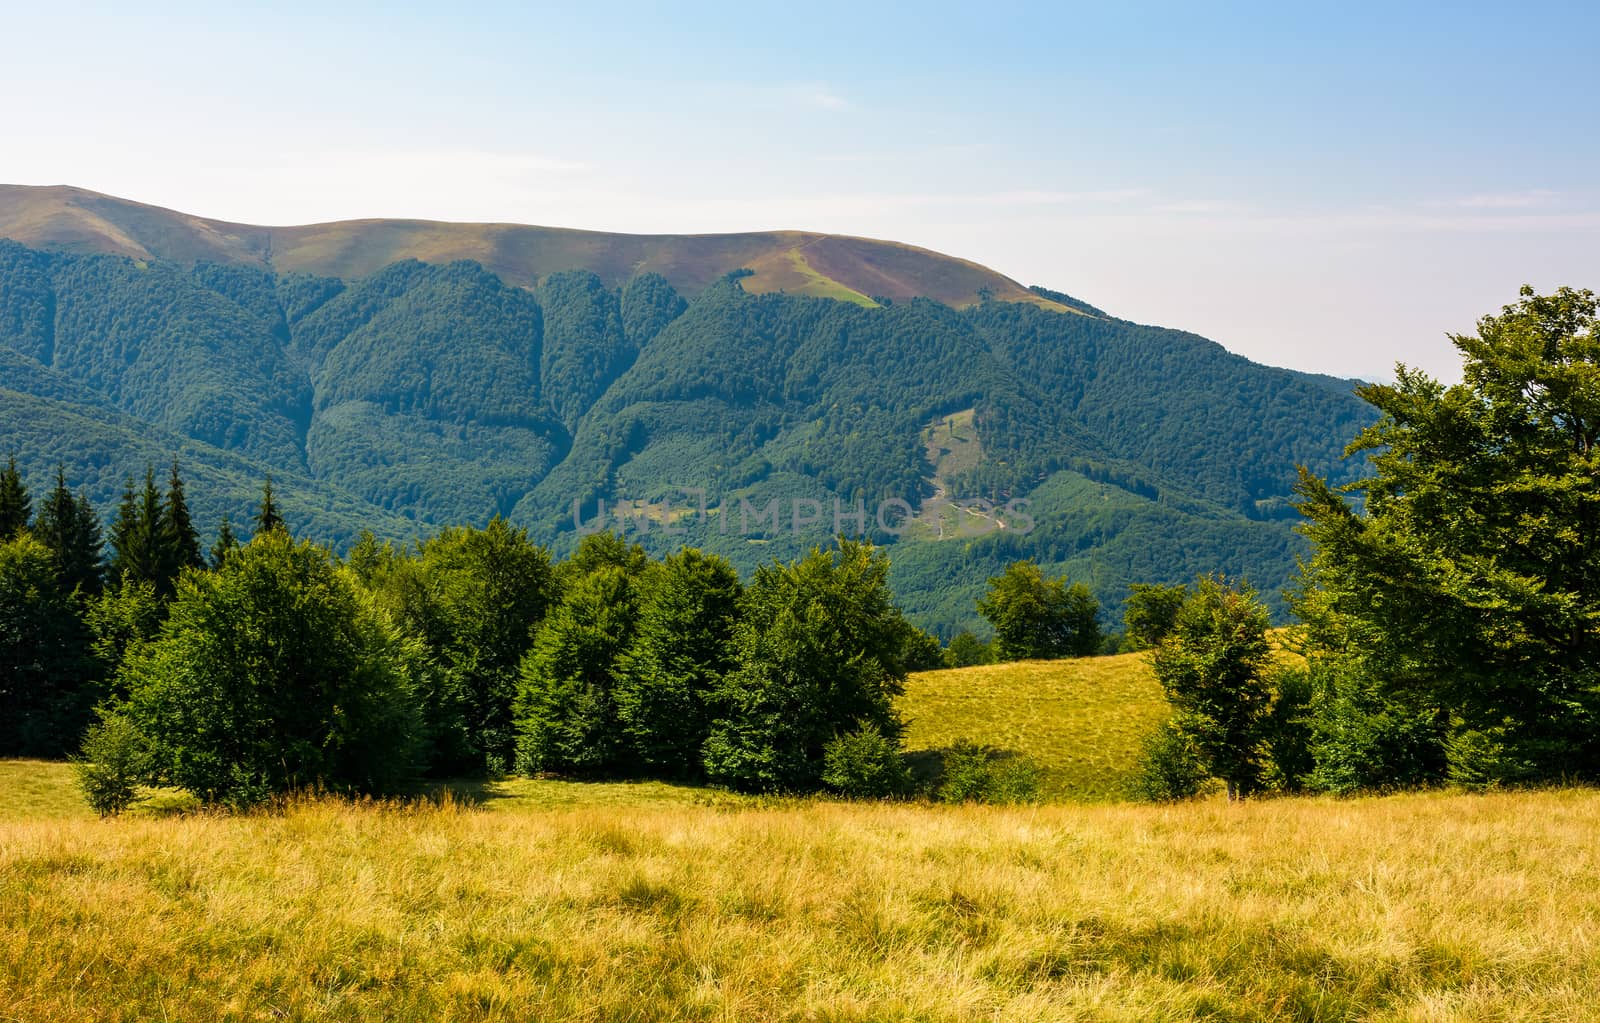 beech forest on grassy meadows in mountains by Pellinni